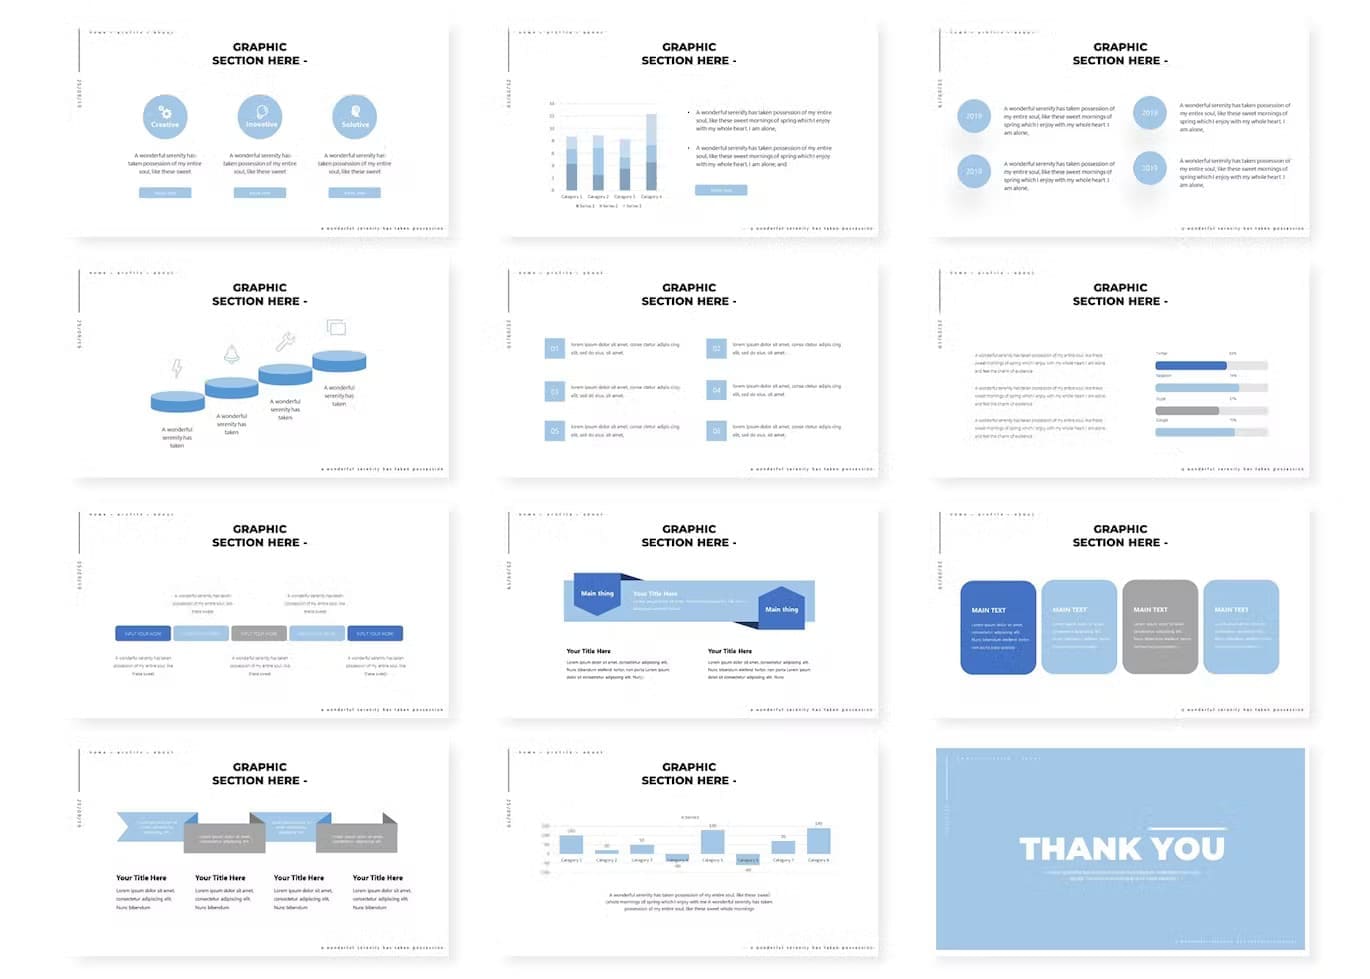 A collection of report templates in 12 slides: Graphic section here.